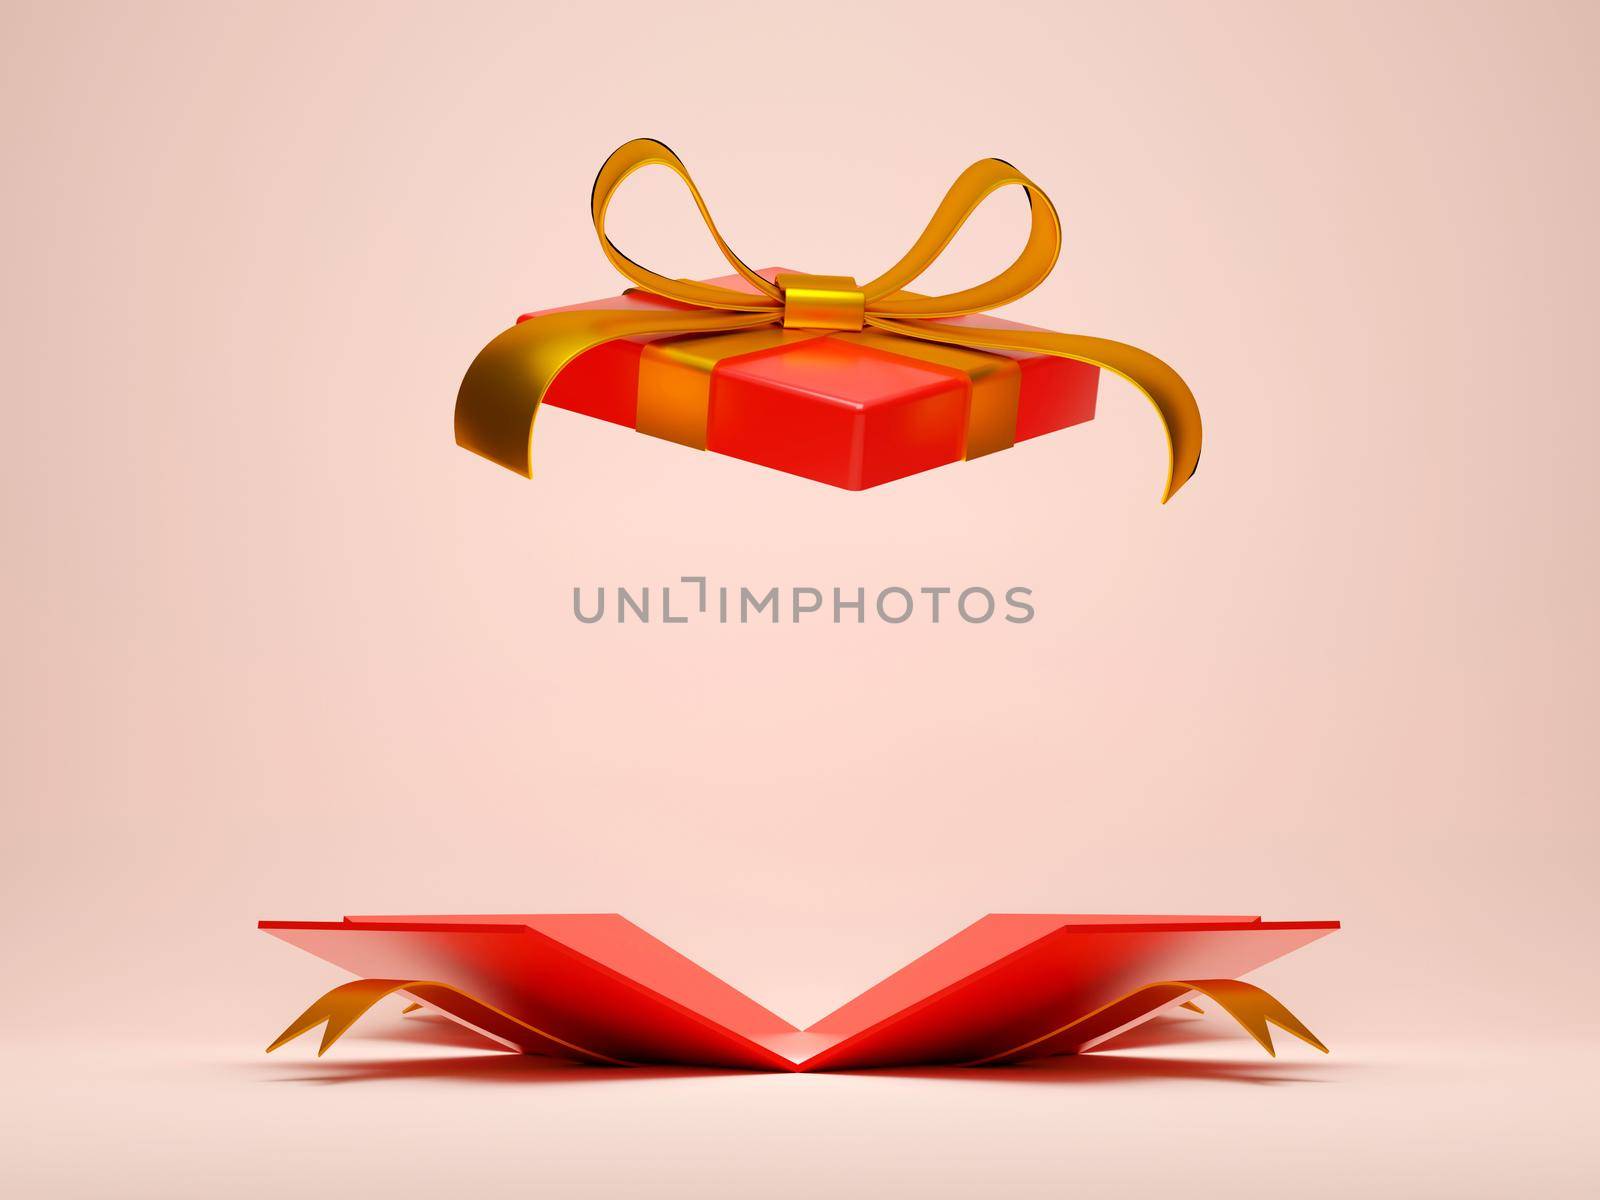 Opened Christmas gift box for product advertisement, 3d illustration